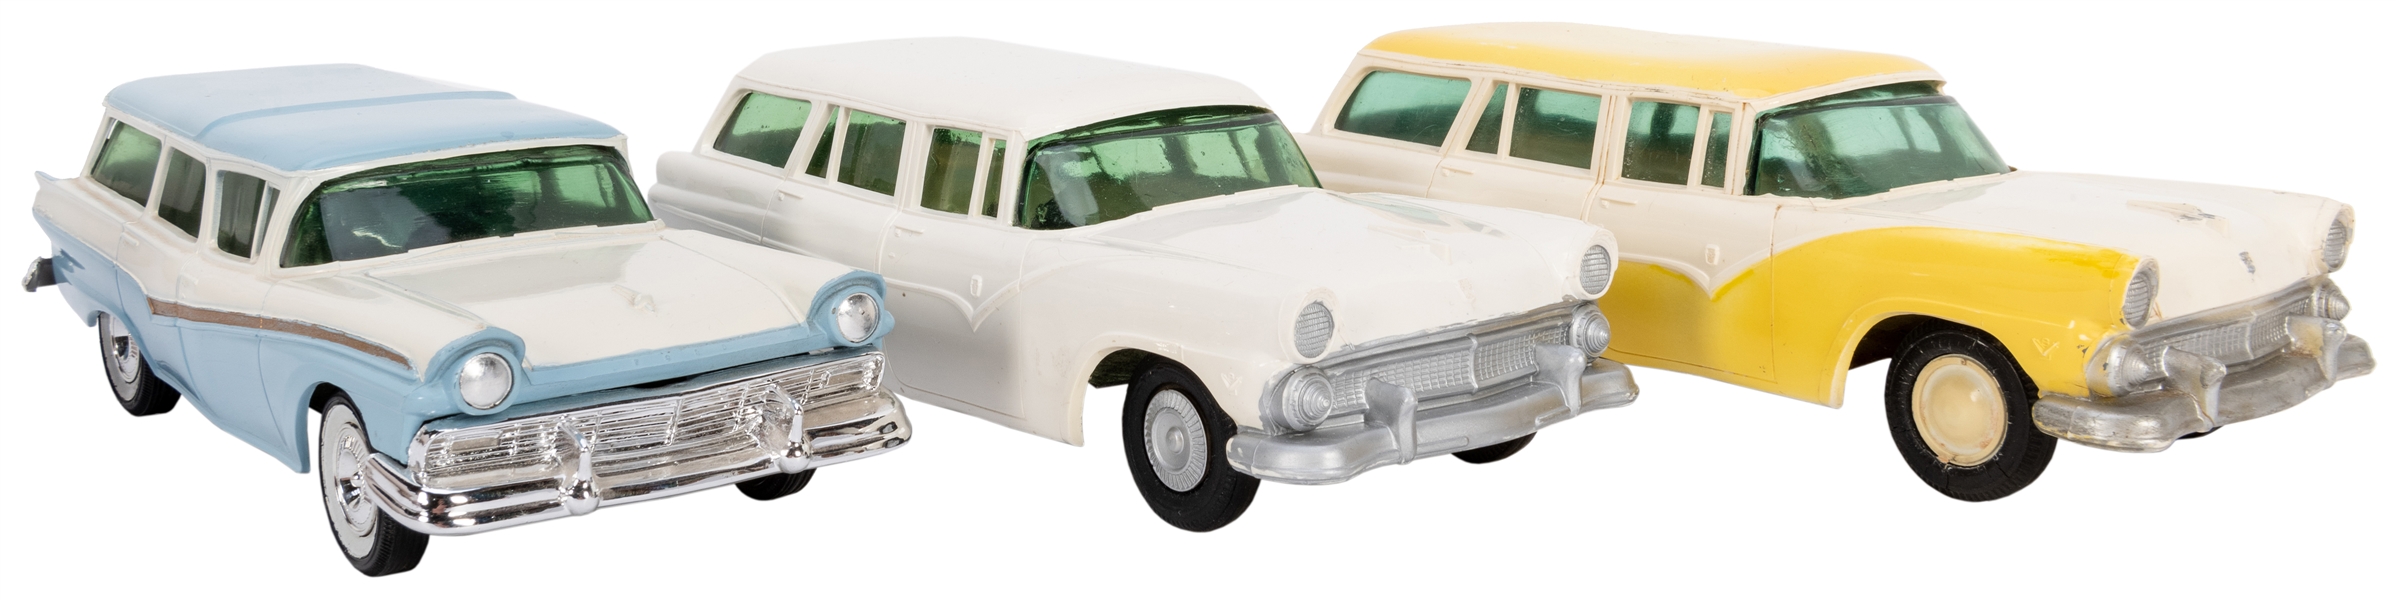  Lot of 3 1950s Ford Country Station Wagon Promo Cars. 